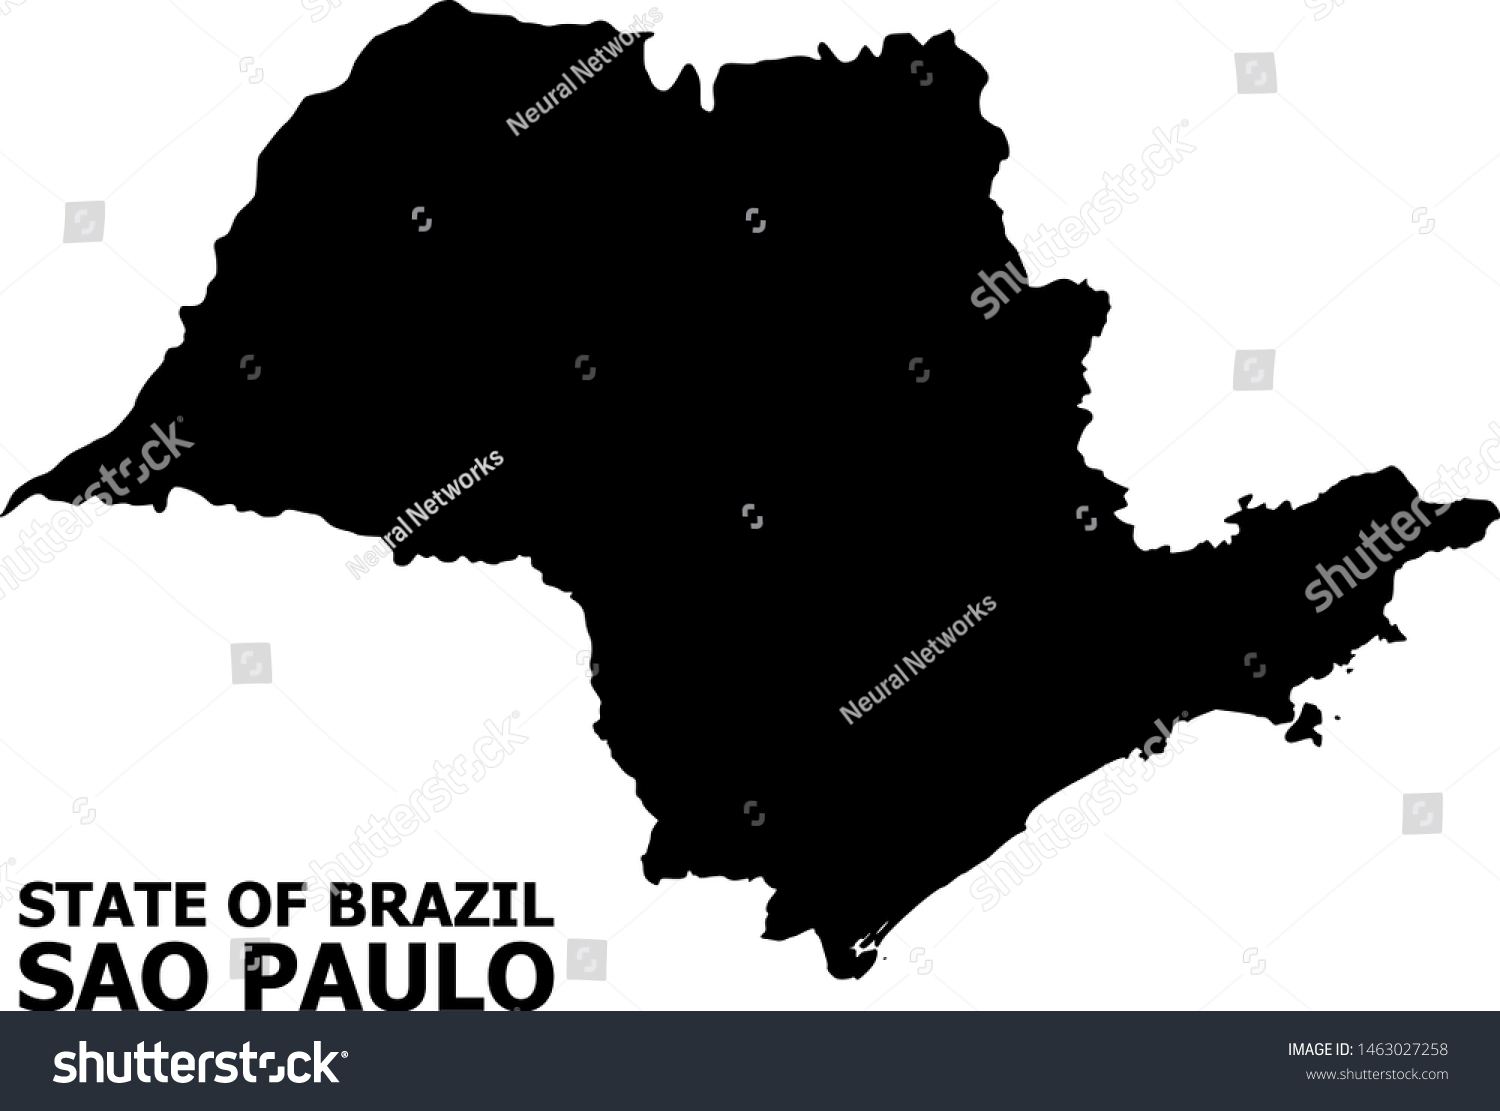 Vector Map Of Sao Paulo State With Name Map Of Royalty Free Stock Vector 1463027258 7440